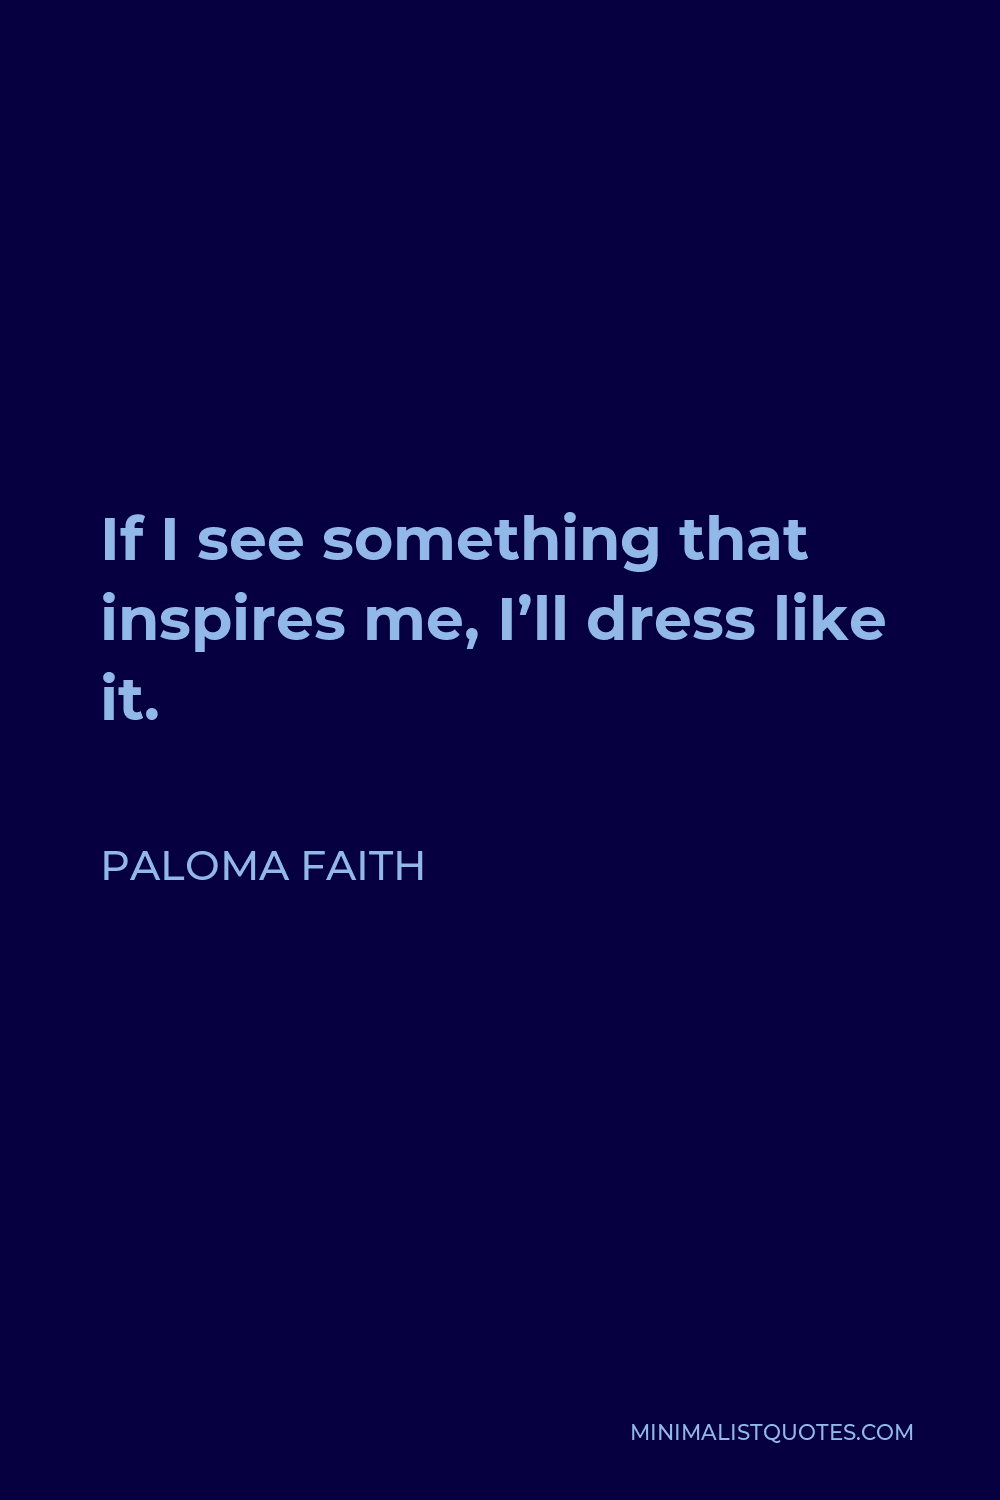 Paloma Faith Quote - If I see something that inspires me, I’ll dress like it.